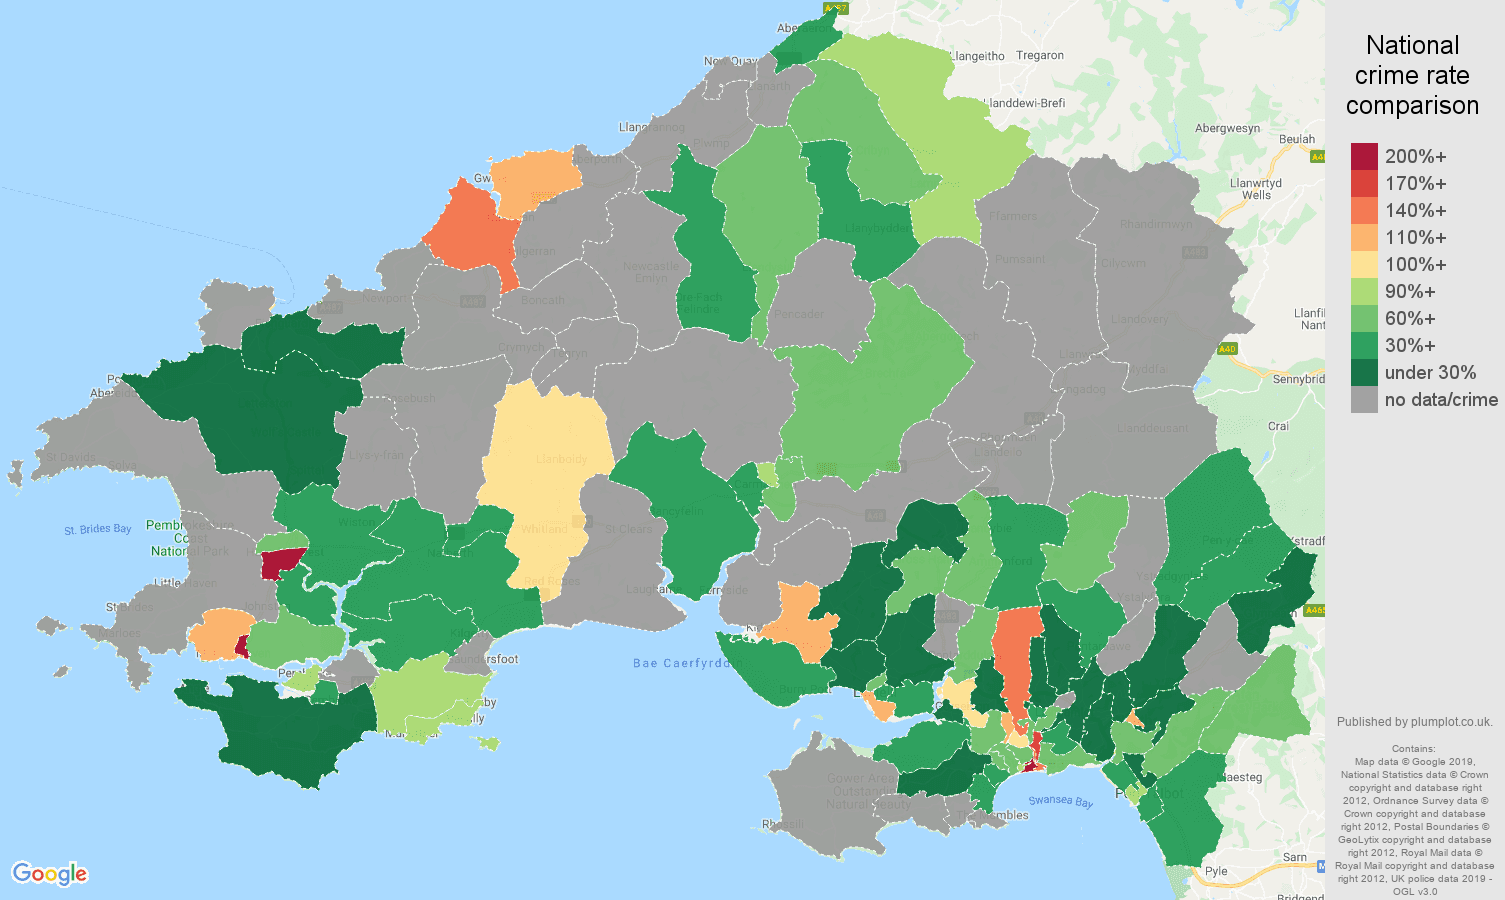 Swansea possession of weapons crime rate comparison map